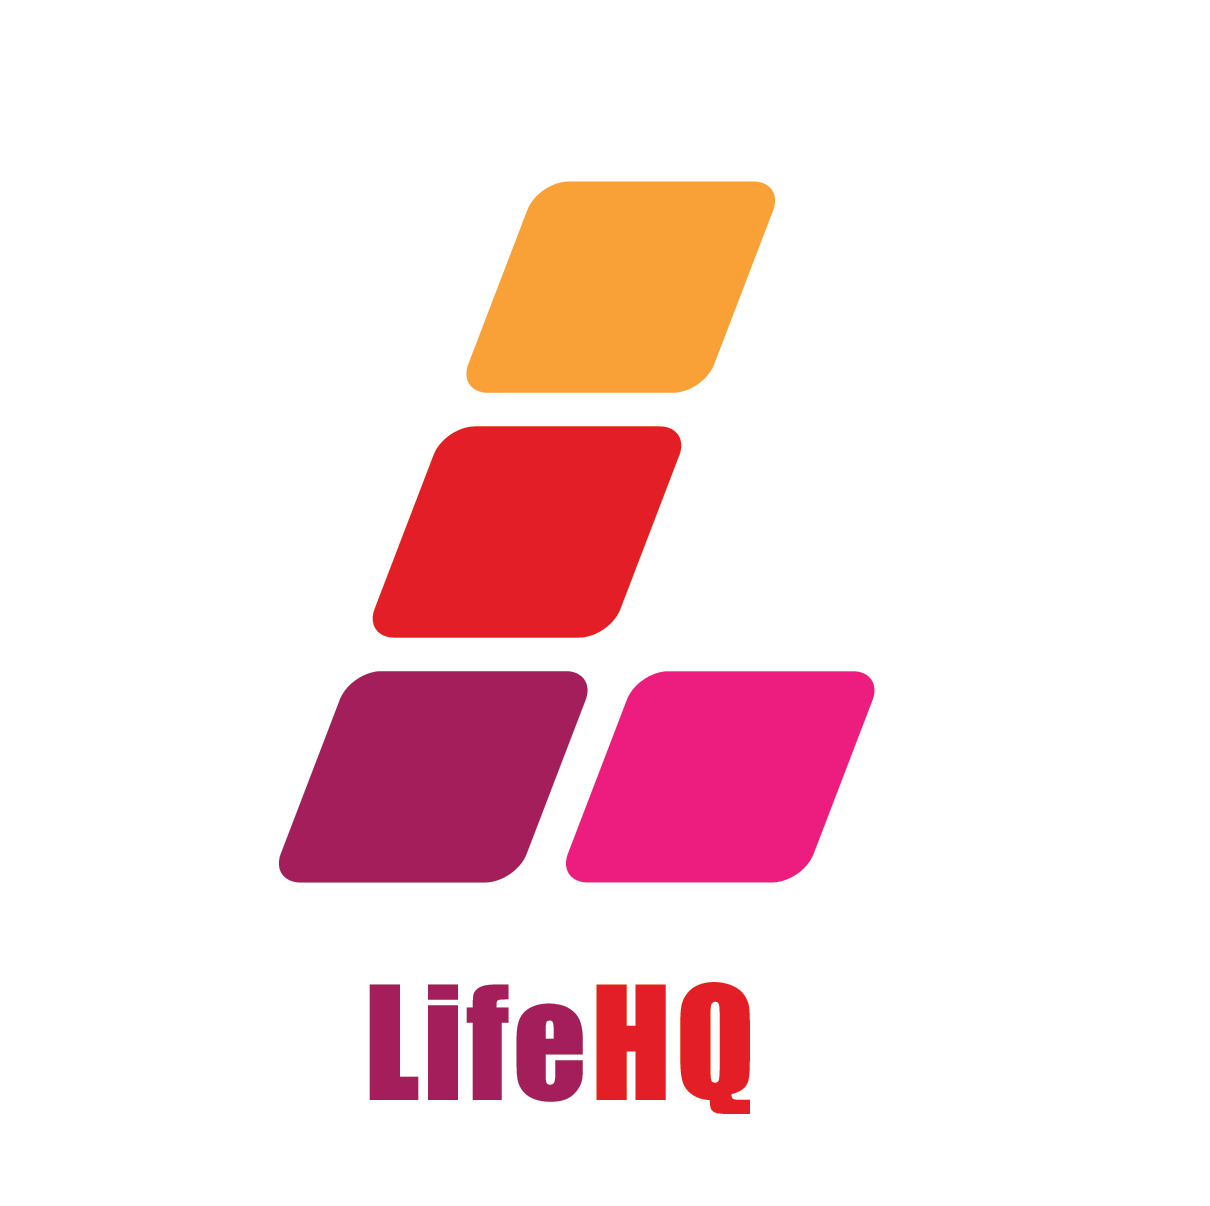 LifeHQ – The road to a Personal Productivity System